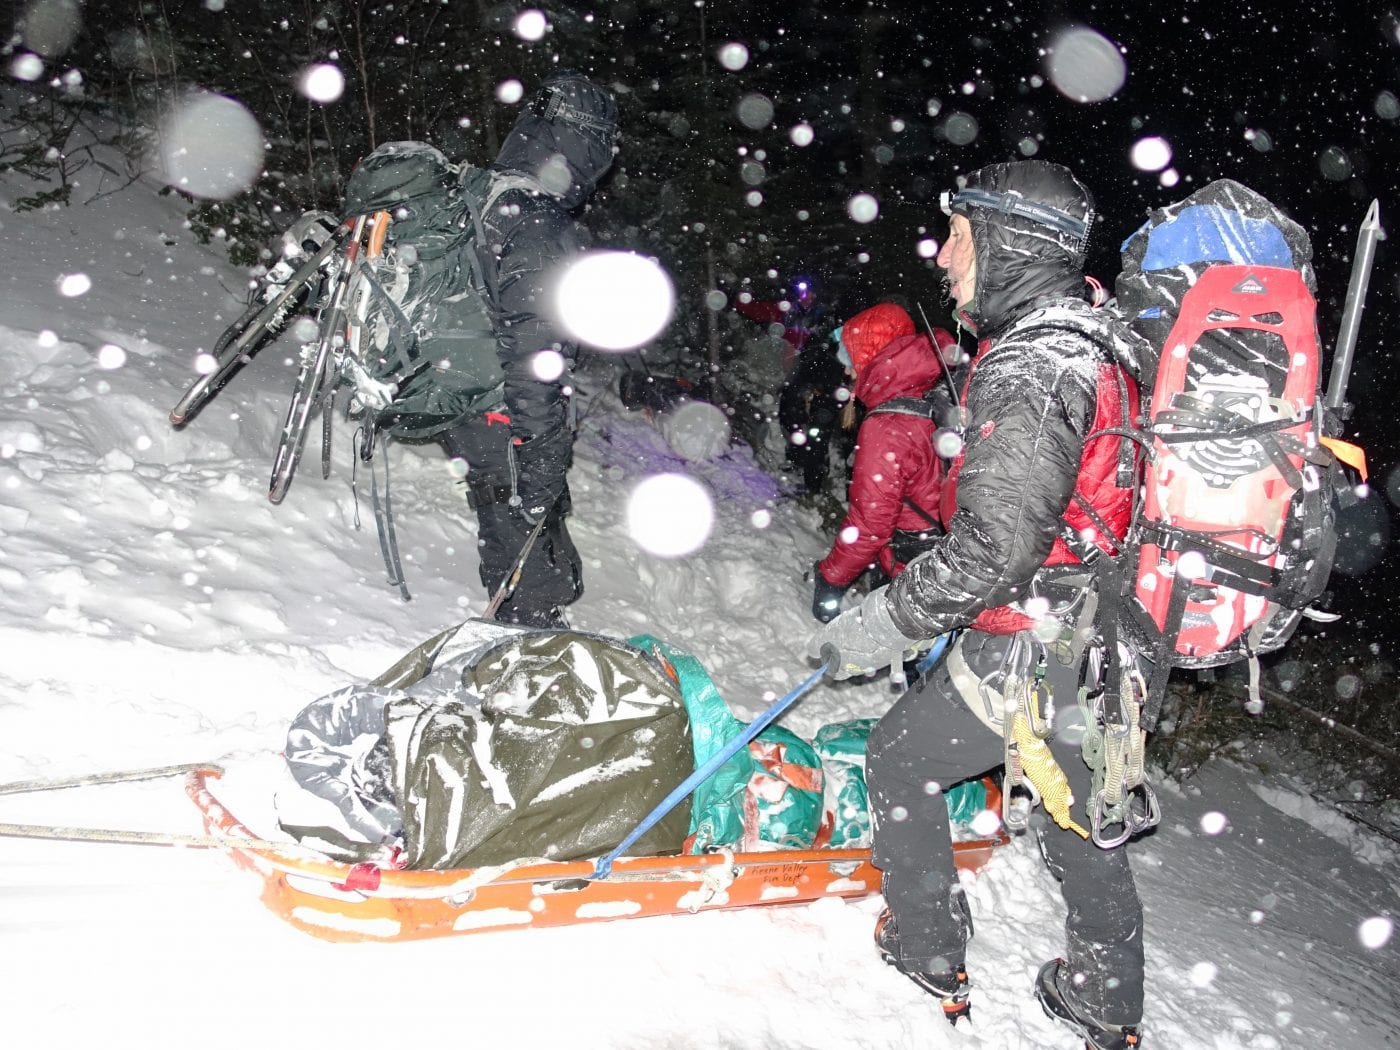 Rescuers transport the patient down Saddleback Mountain. 